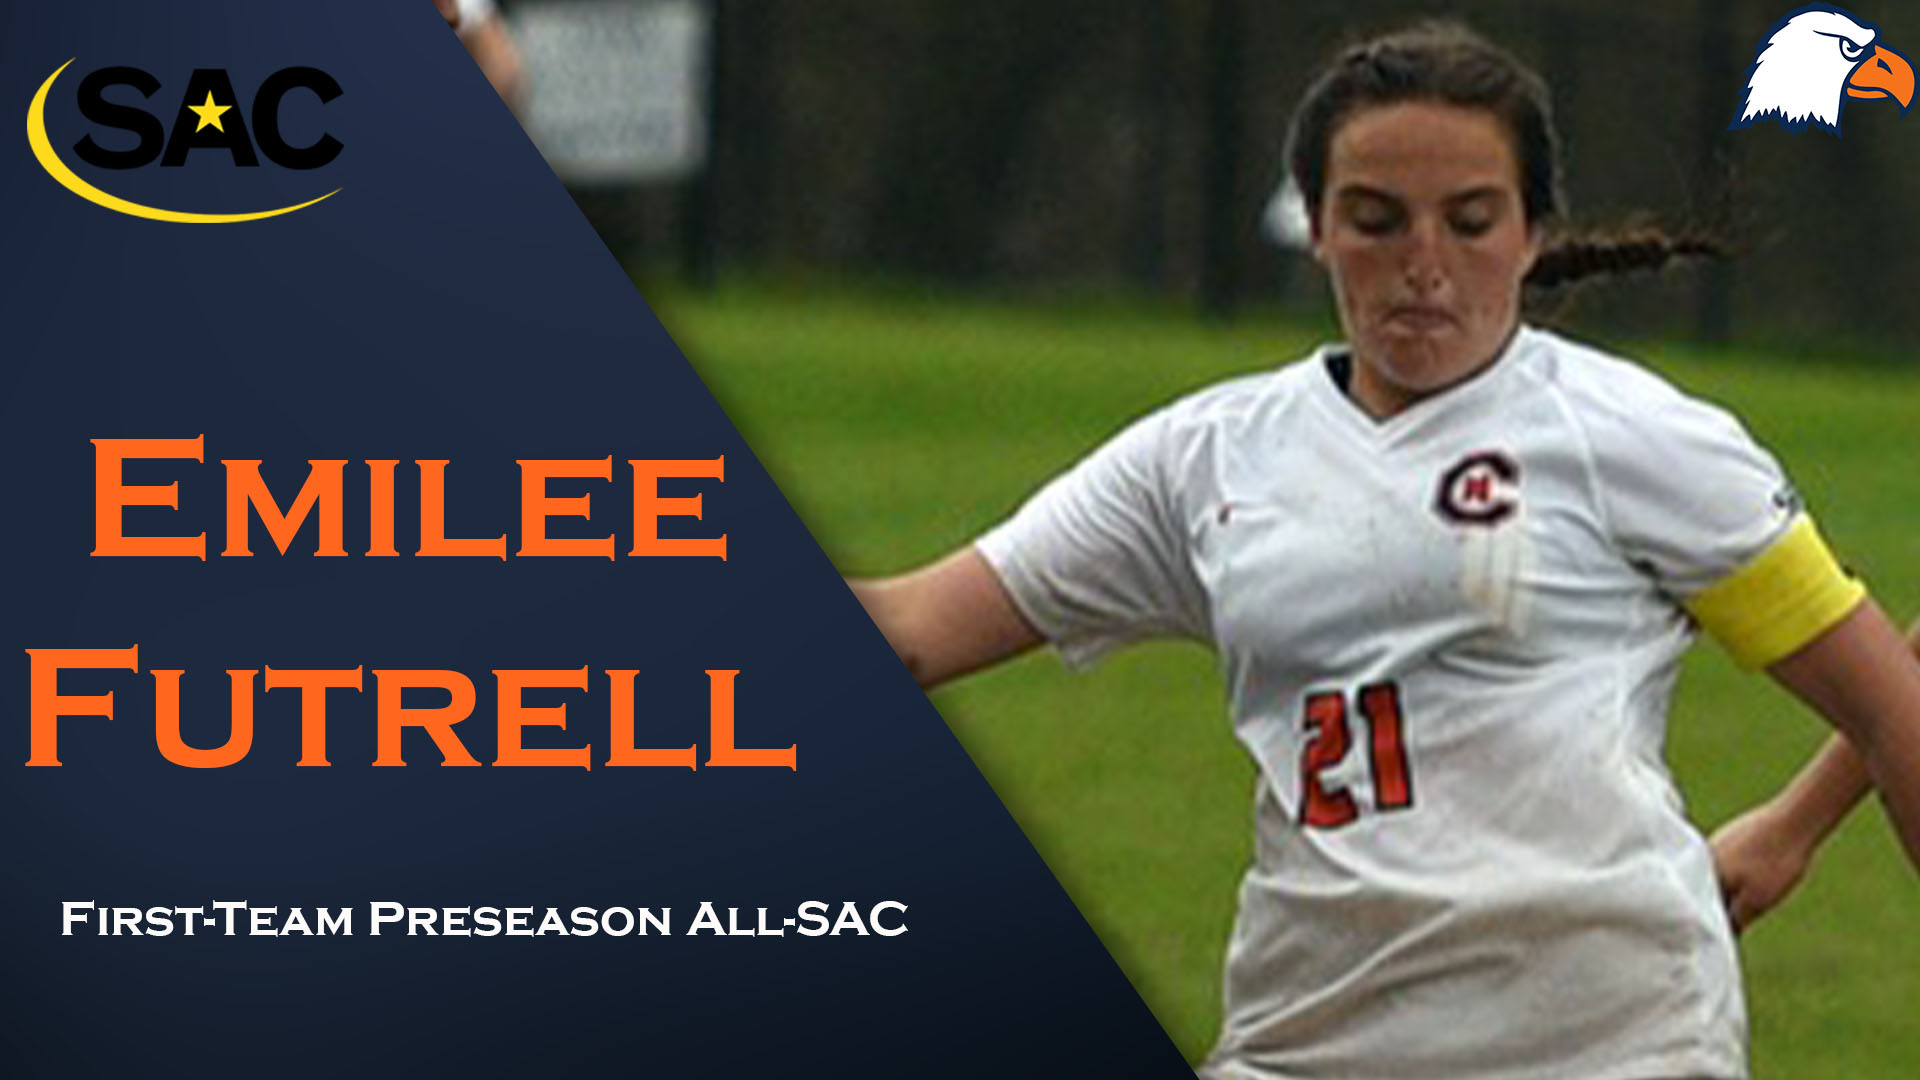 Quintet of Eagles slotted with preseason all-SAC selections